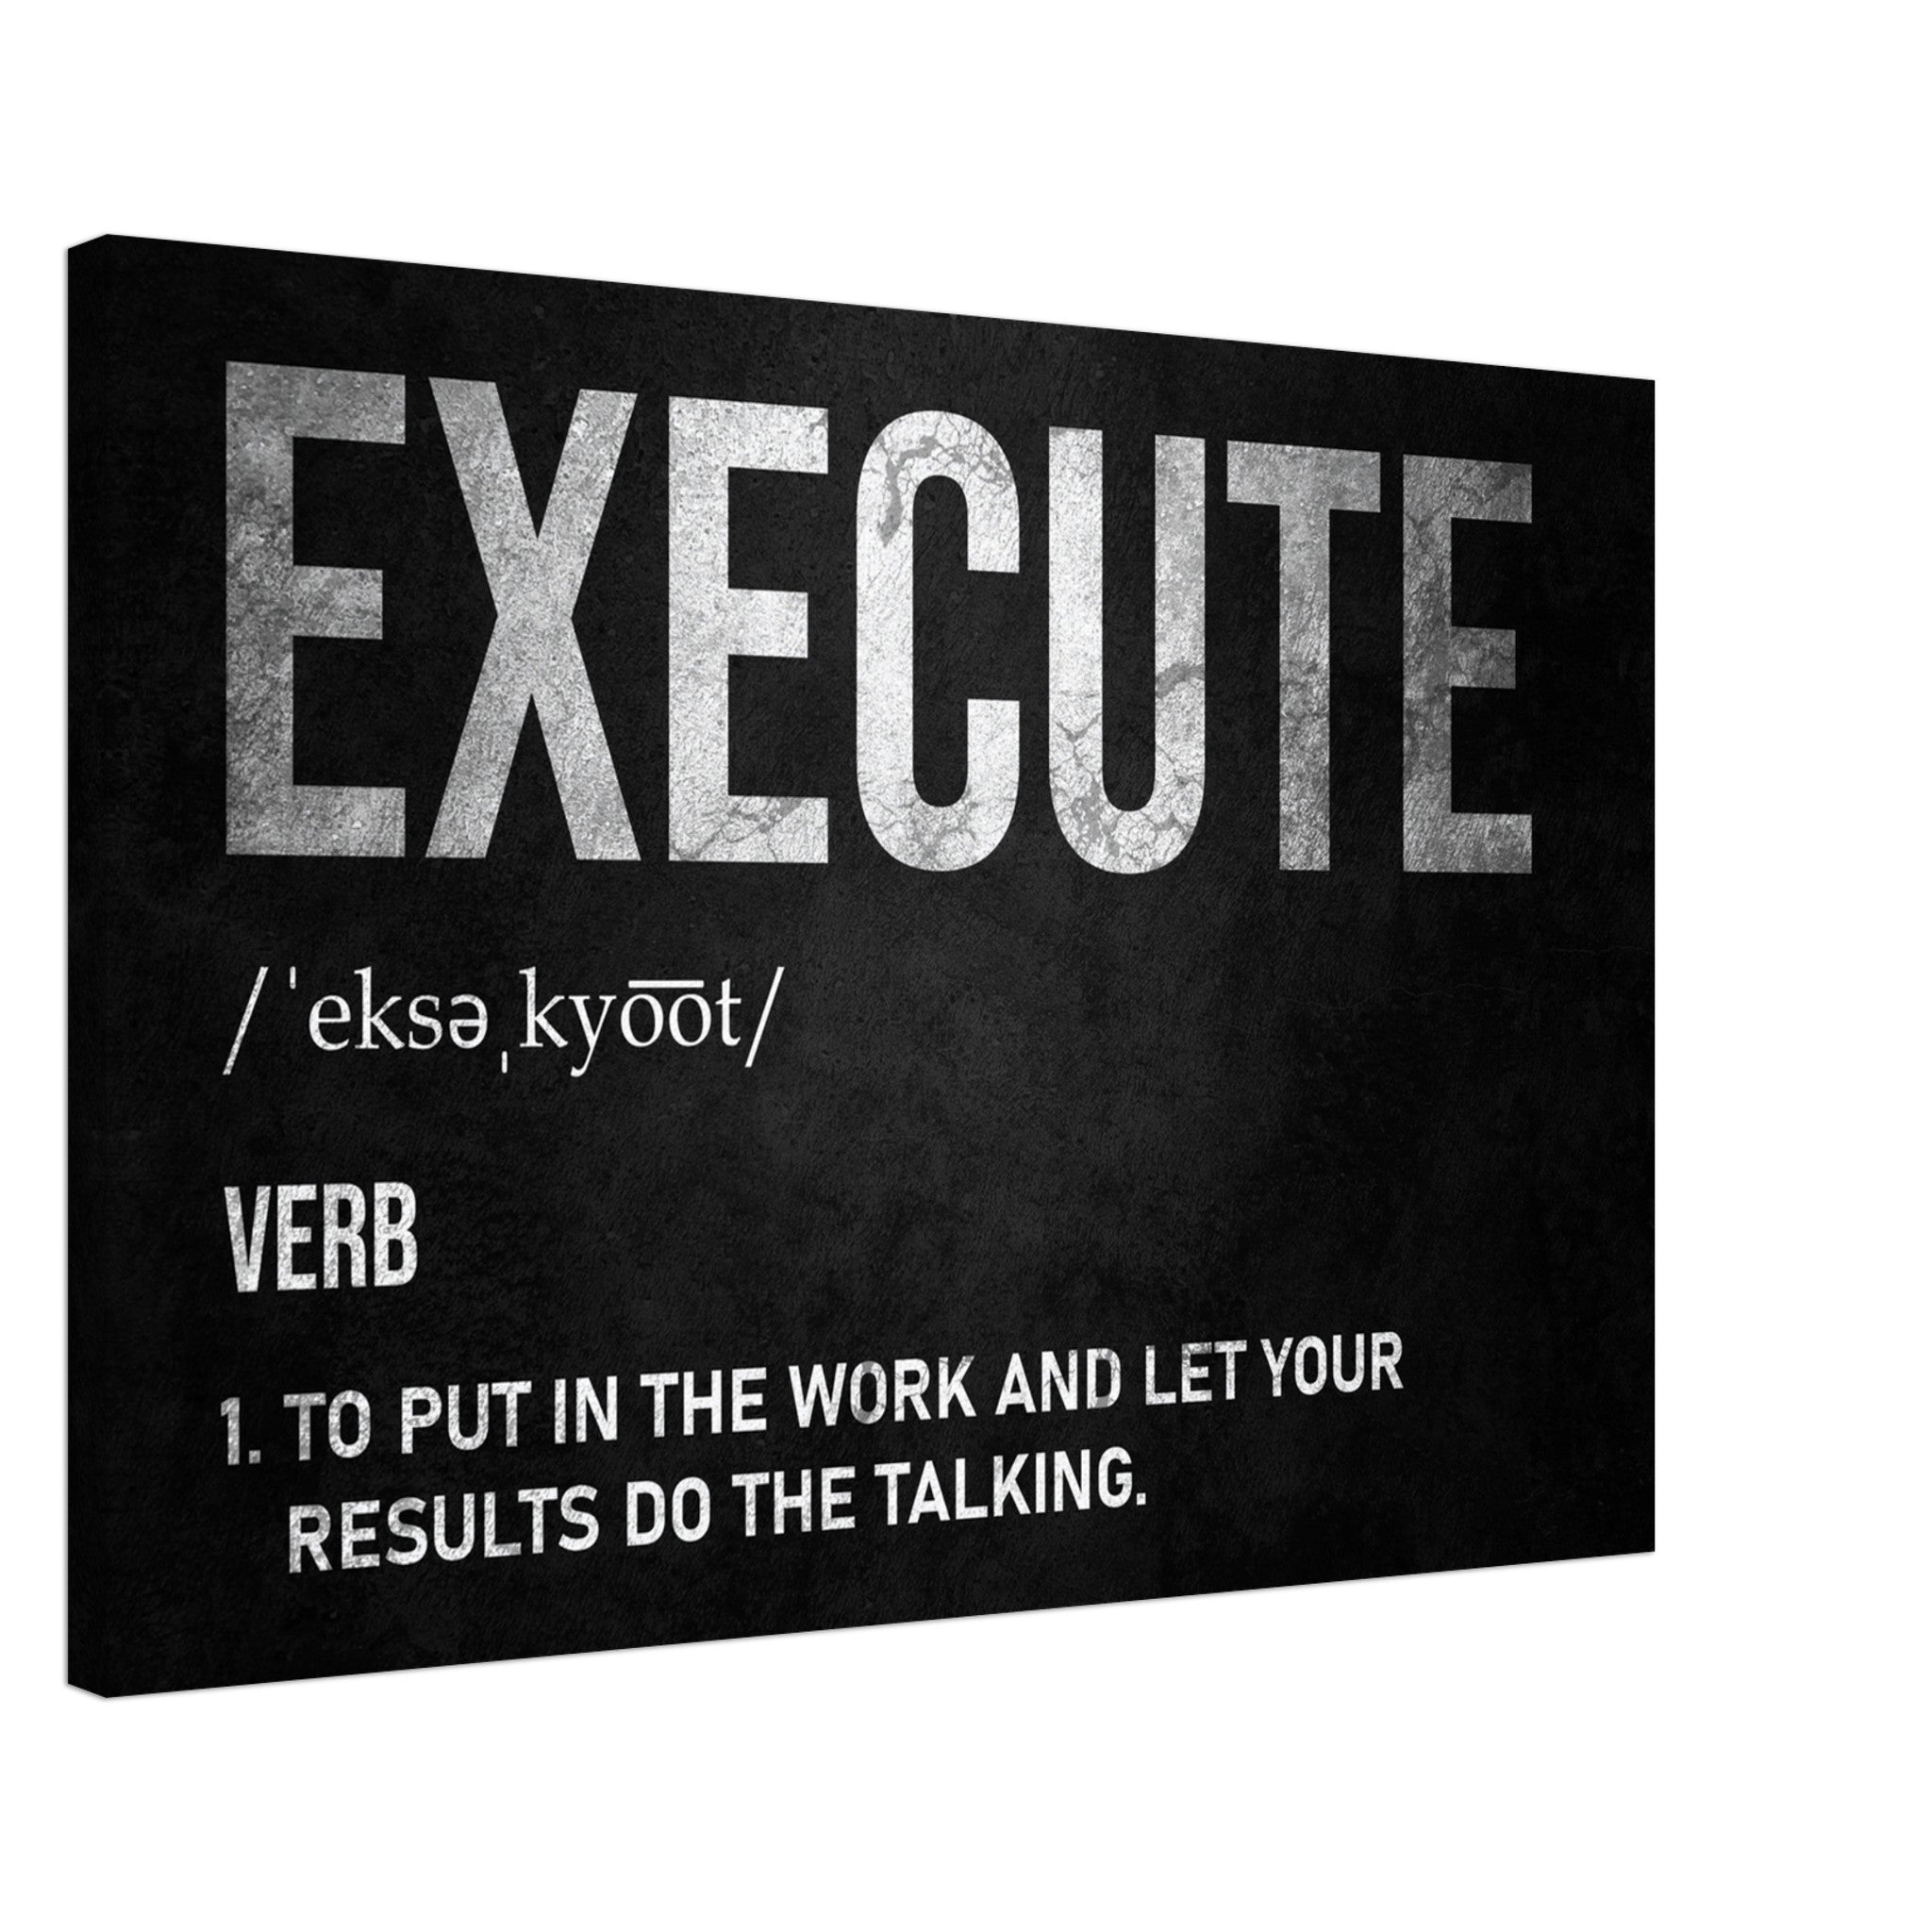 EXECUTE (Definition)